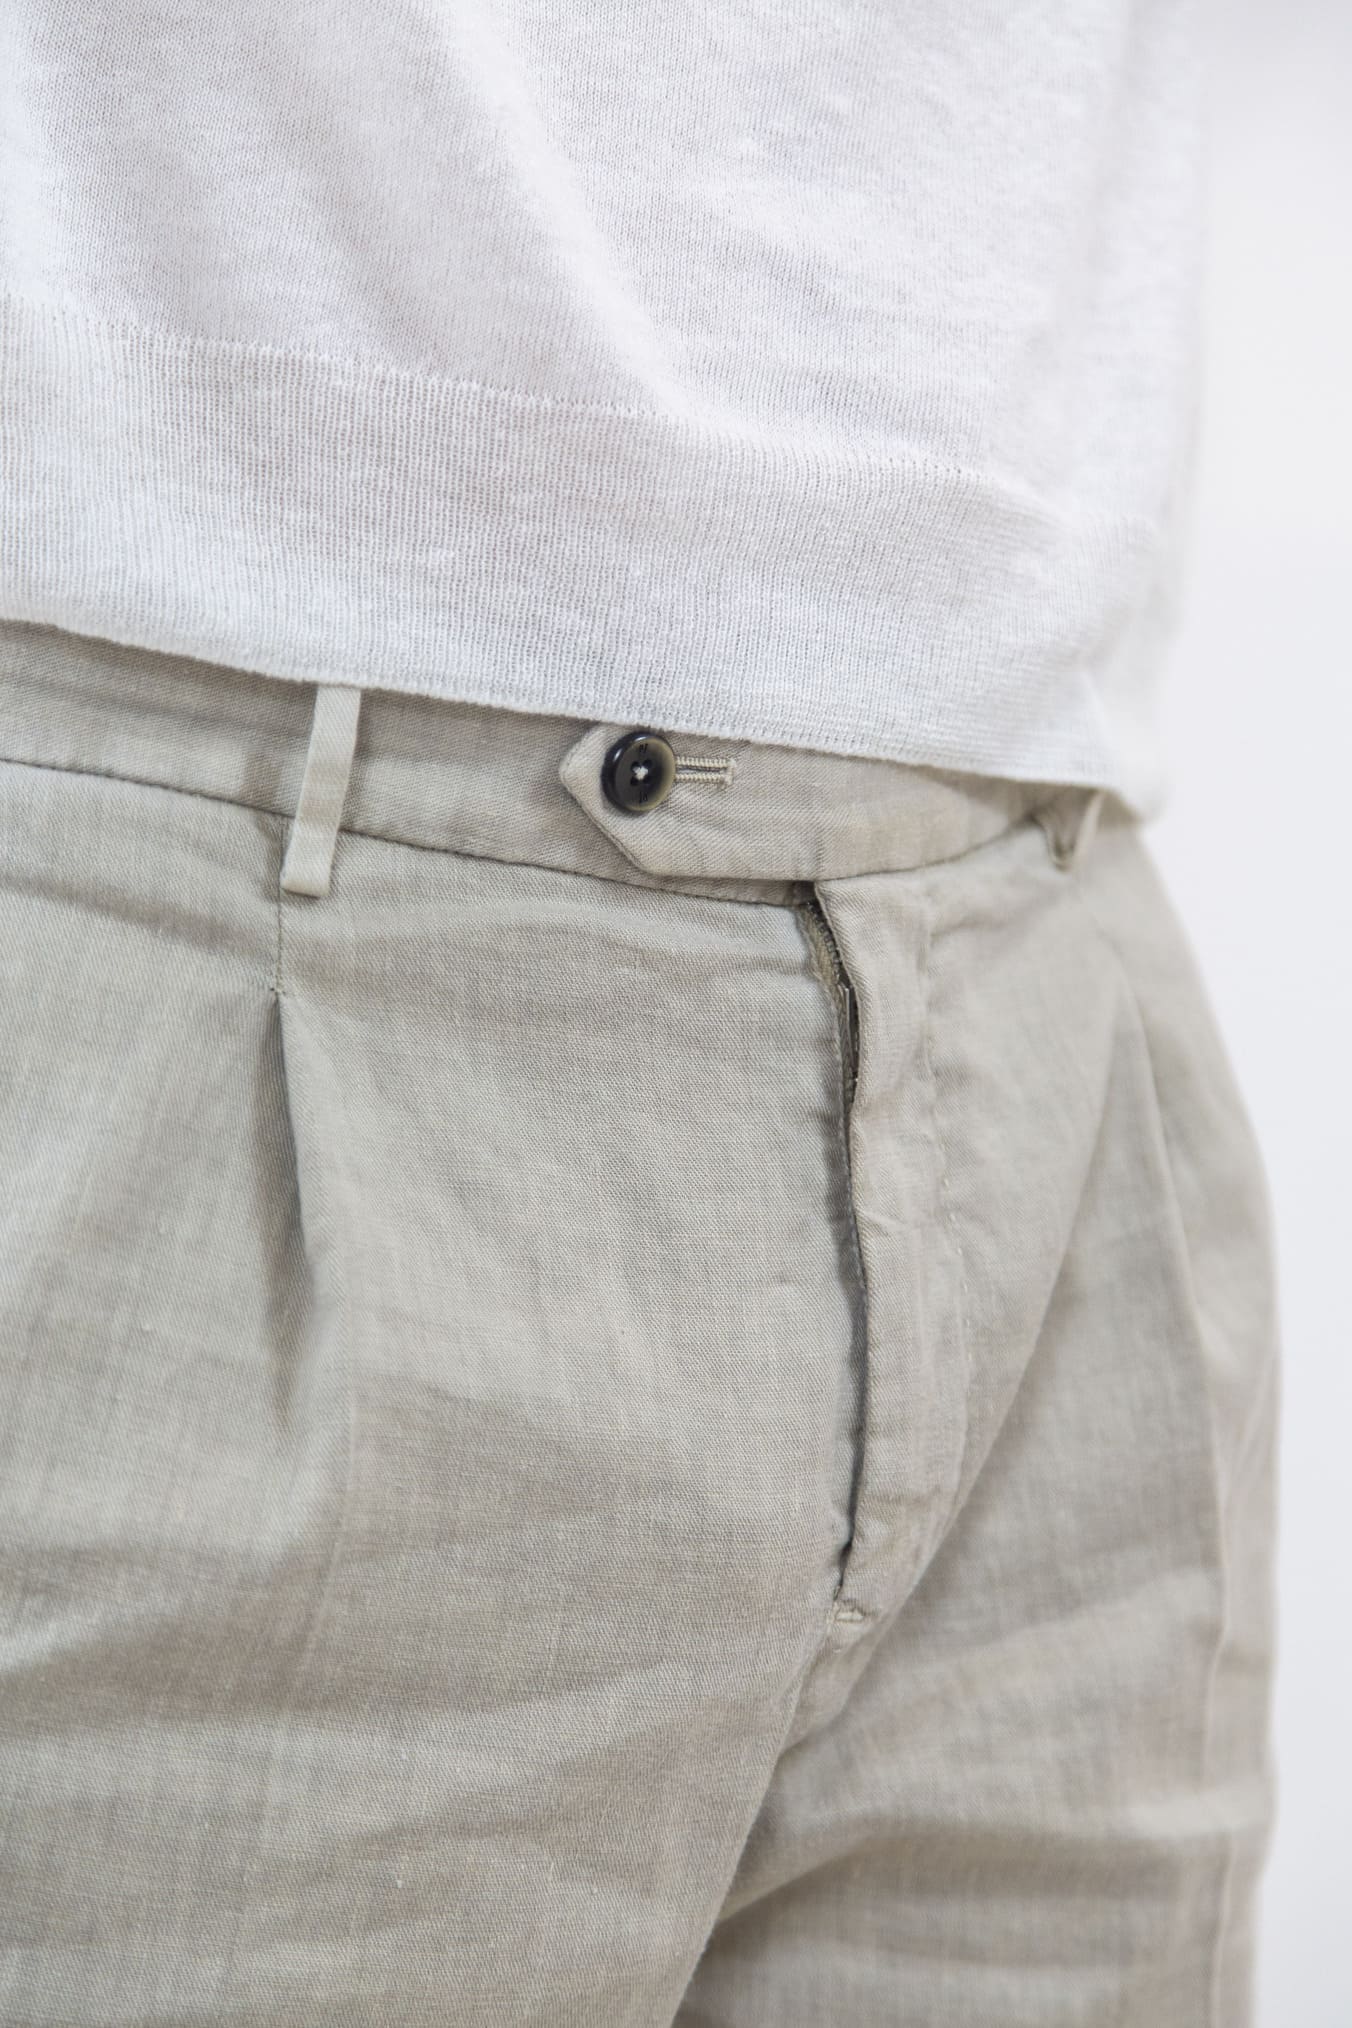 PT Bermuda shorts with pleats and removable drawstring in light beige linen and cotton